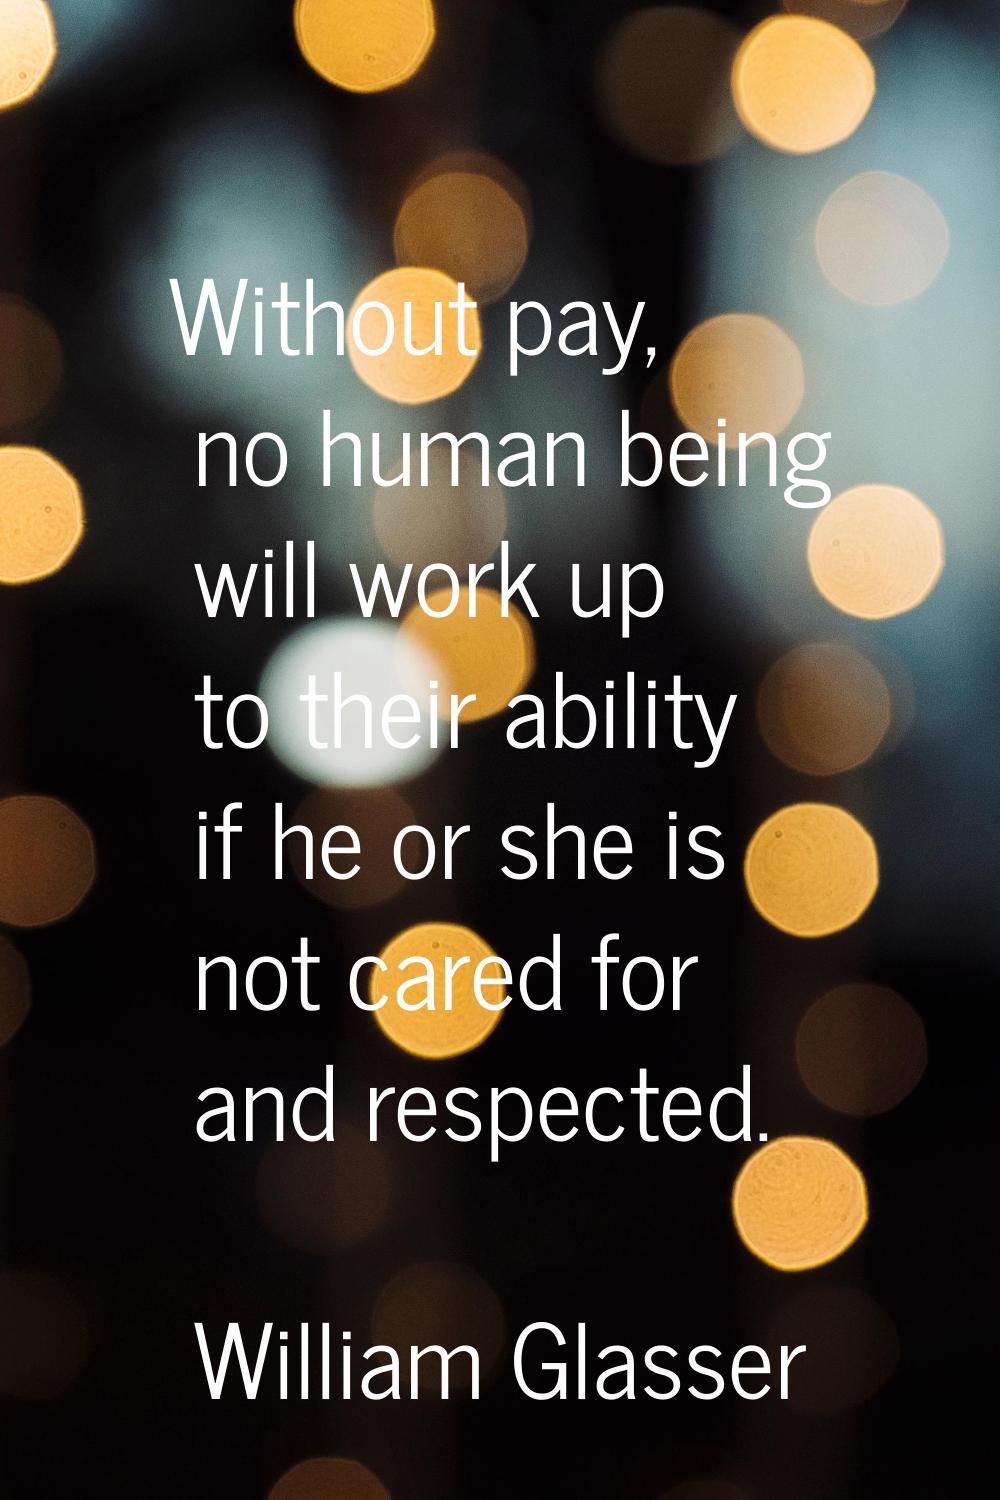 Without pay, no human being will work up to their ability if he or she is not cared for and respect